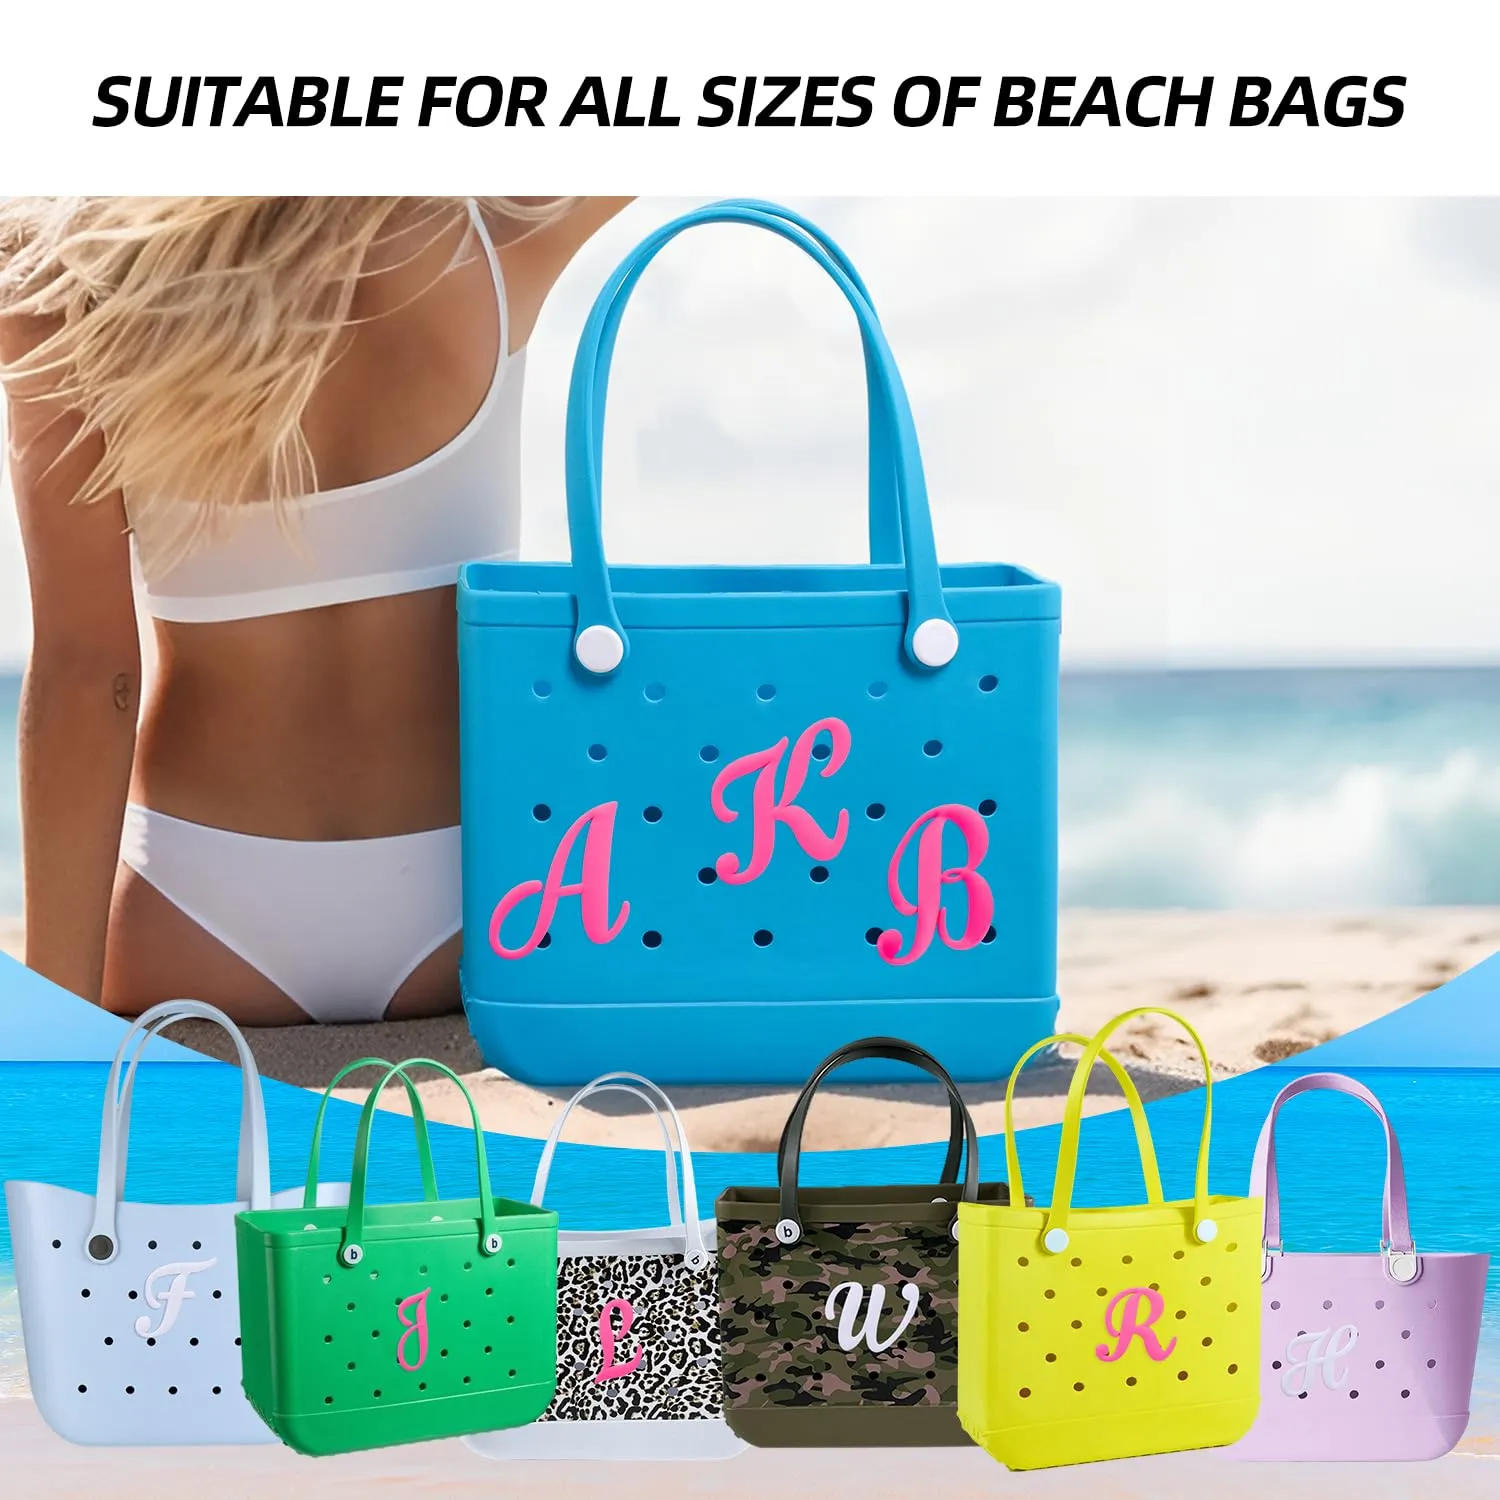 charms for bogg bag letters rubber beach bag accessories for tote bags bogg bag with alphabet letters